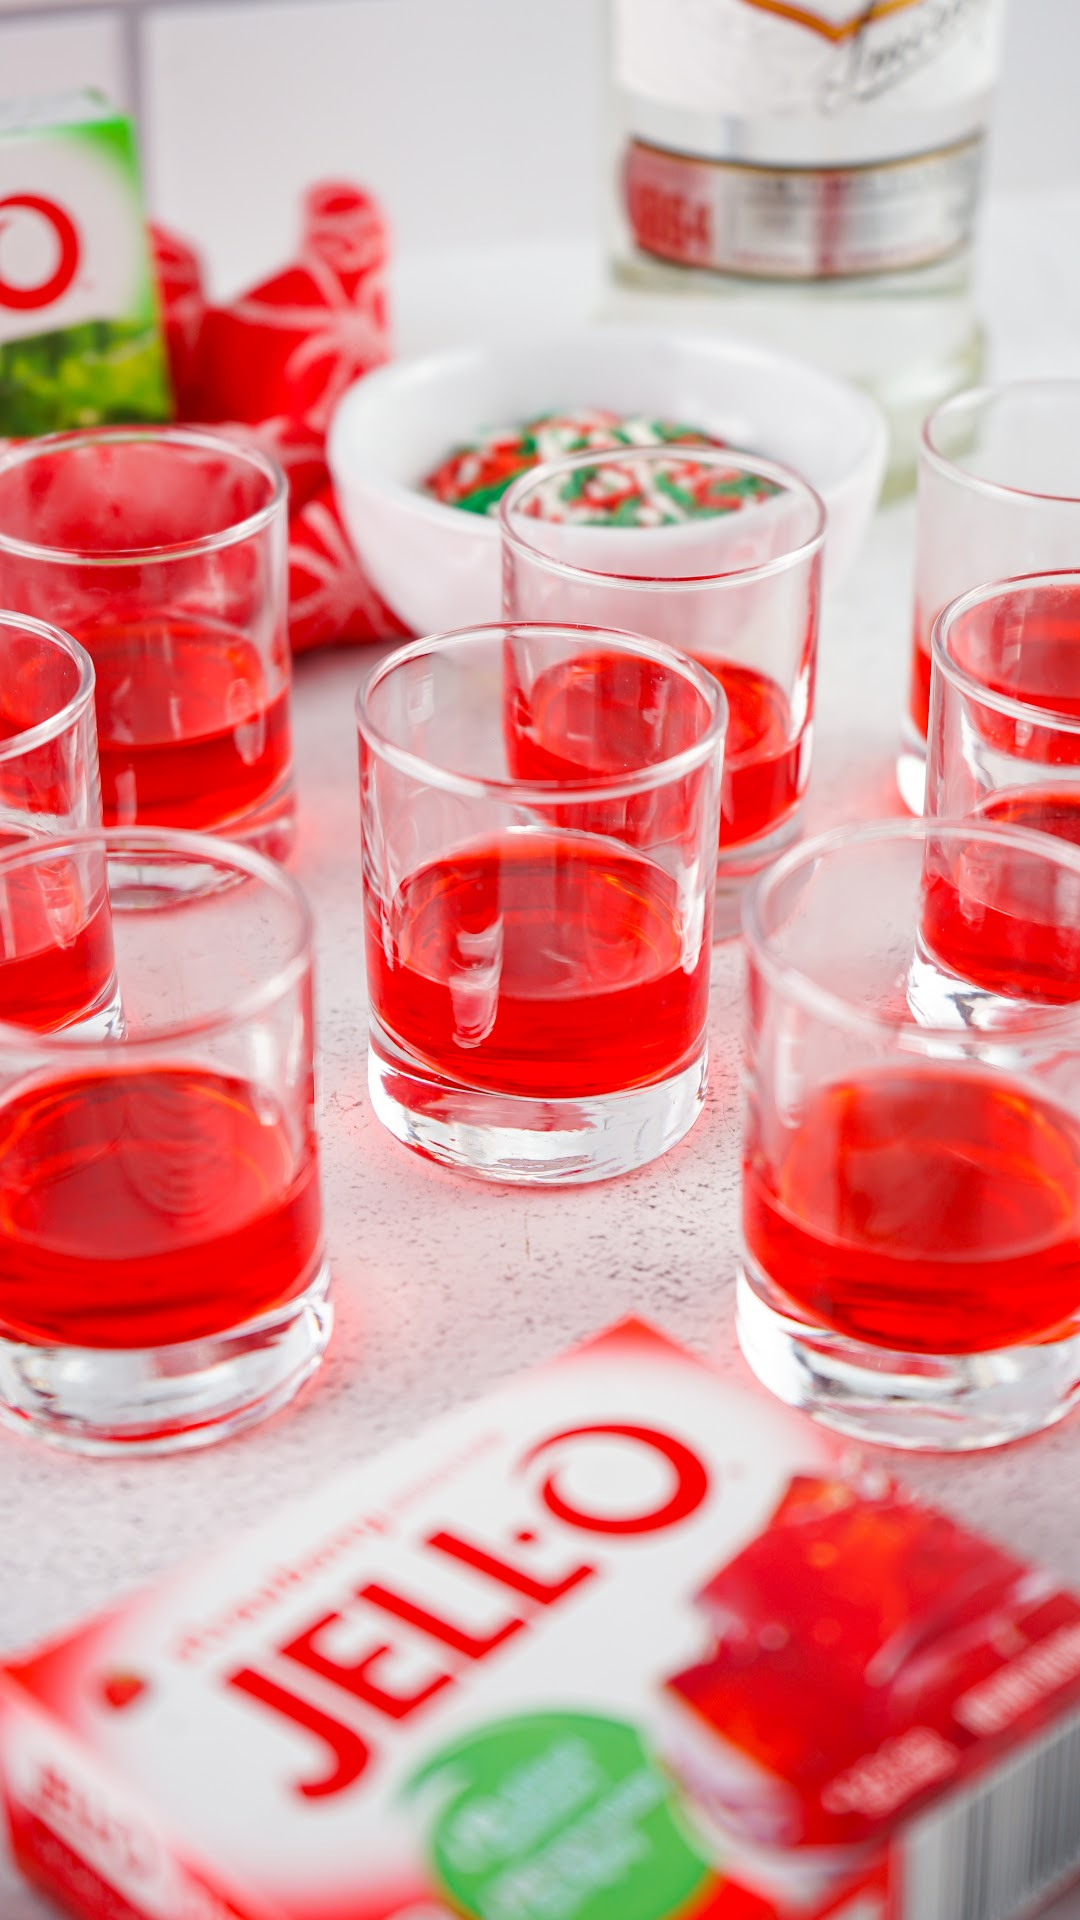 making the red layer of the layered Christmas jello shots